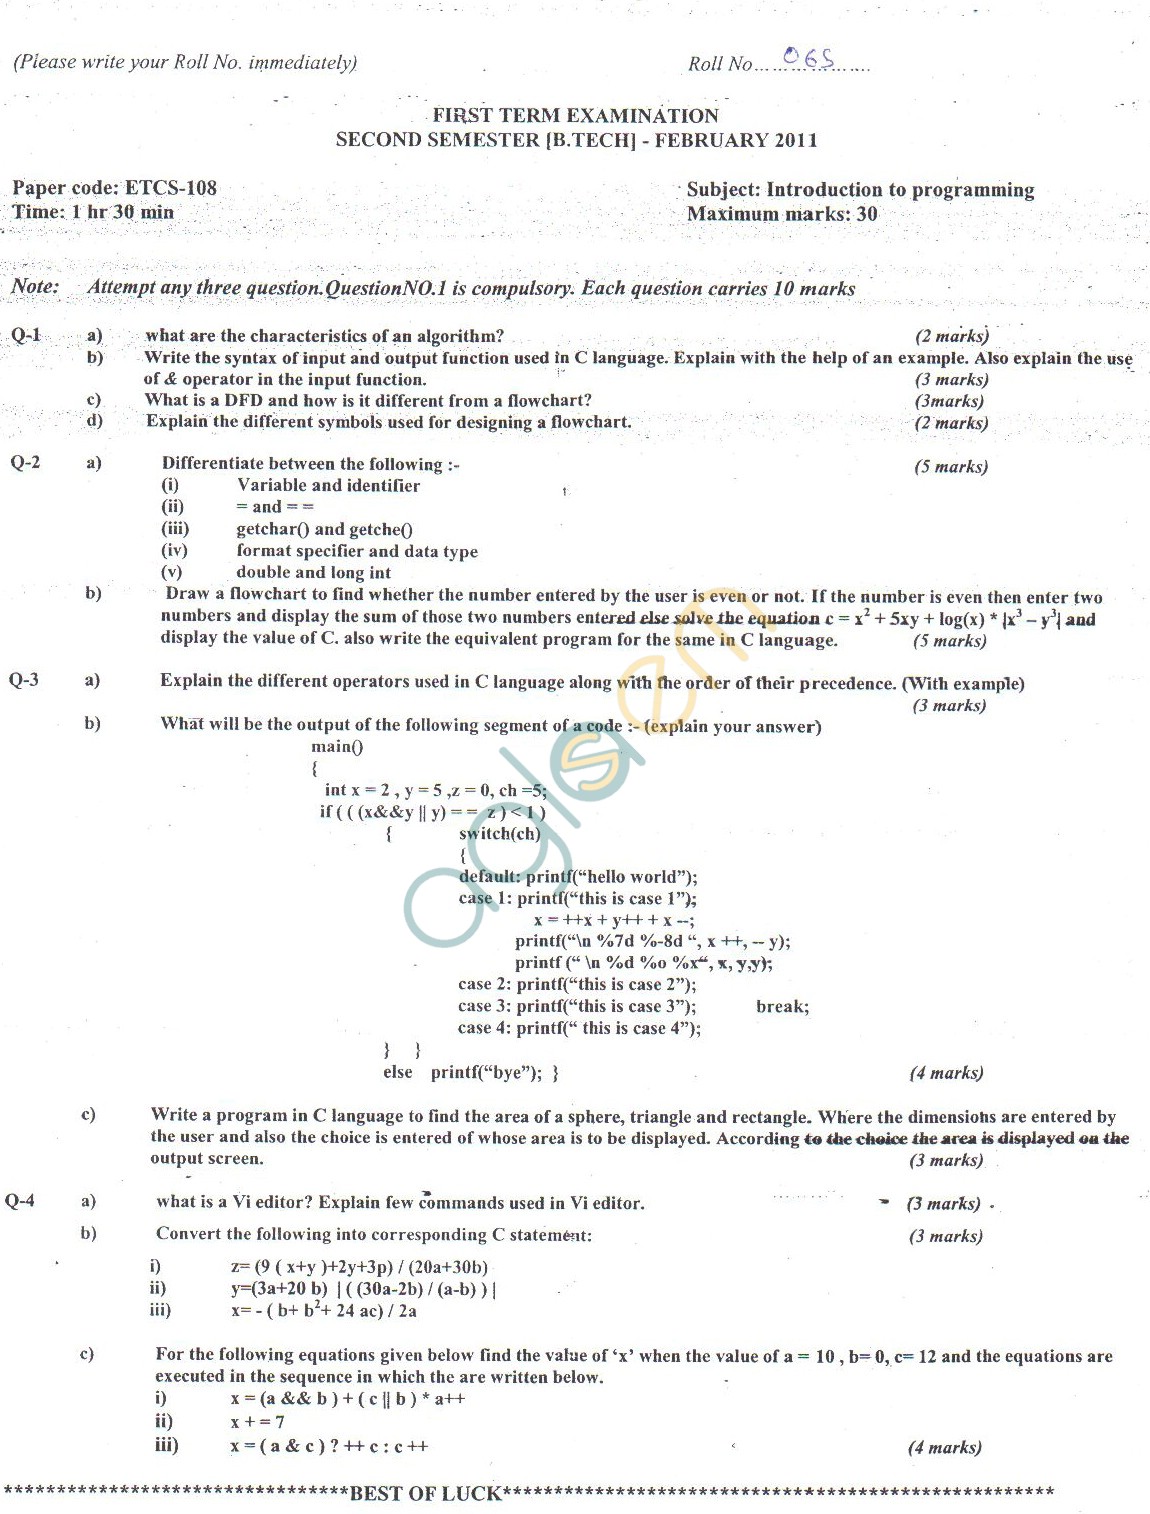 GGSIPU Question Papers Second Semester  First Term 2011  ETCS-108